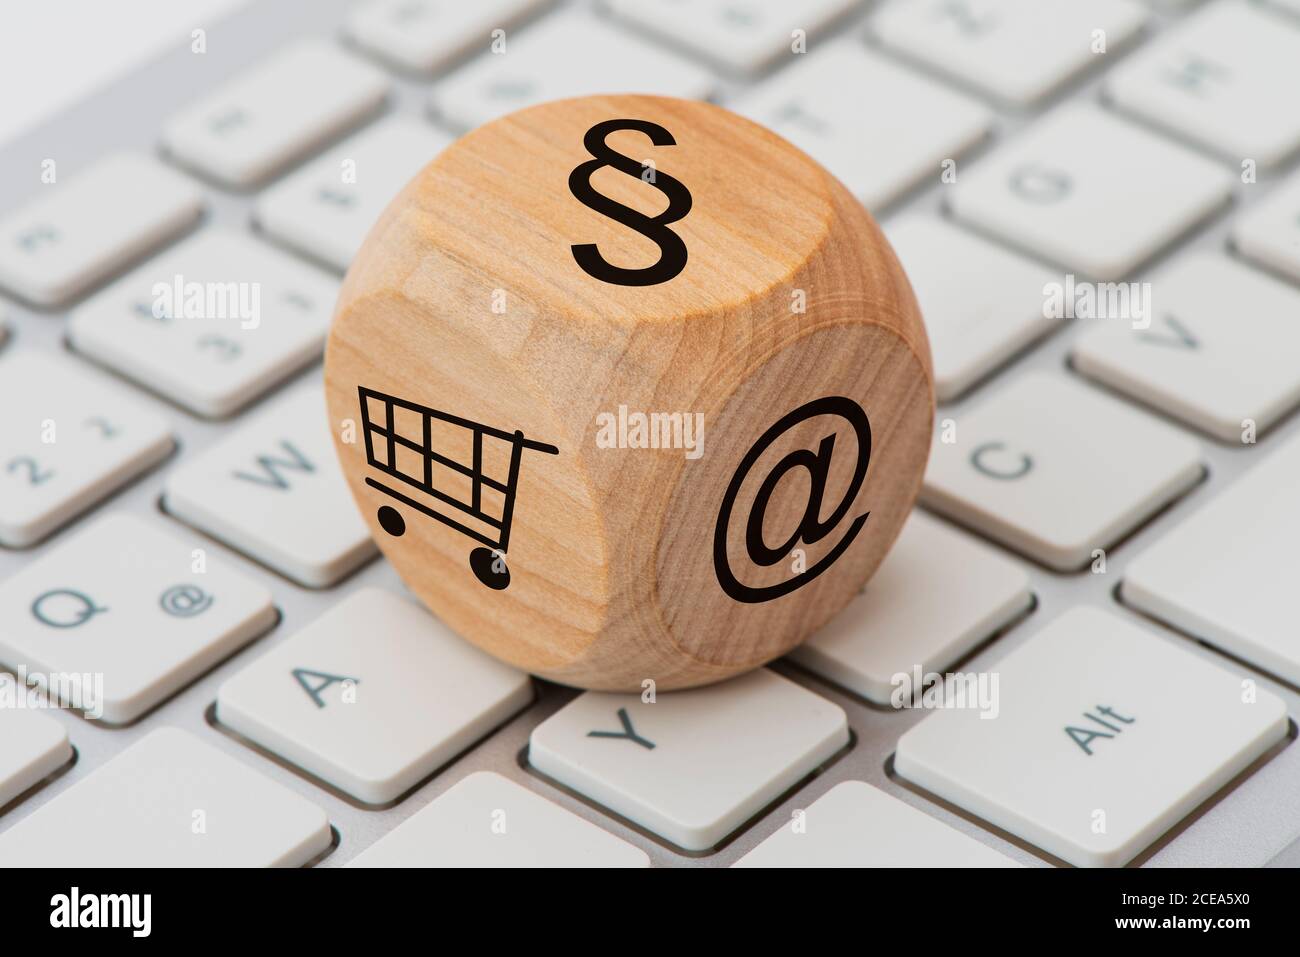 Online trade with paragraf printed on wooden cube Stock Photo